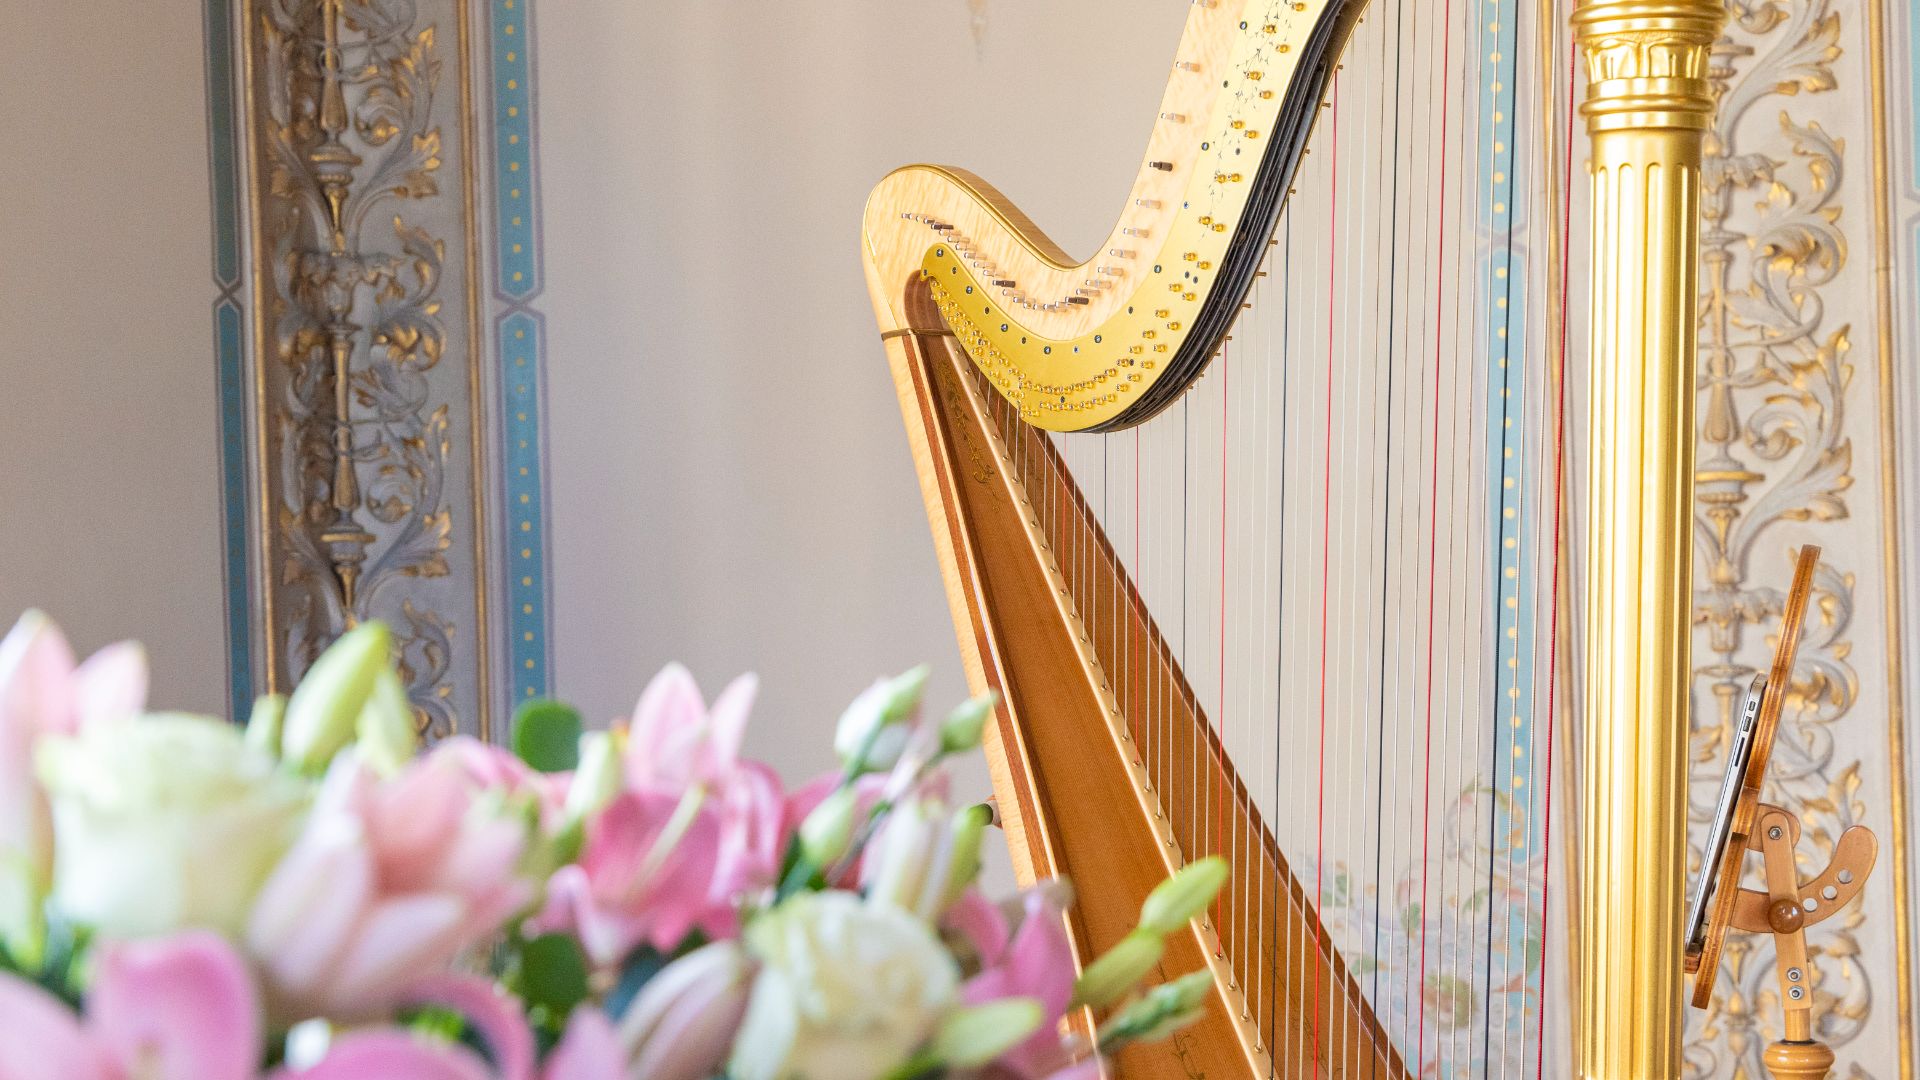 A gold harp in the Drawing Room with pink and white flowers in the foreground